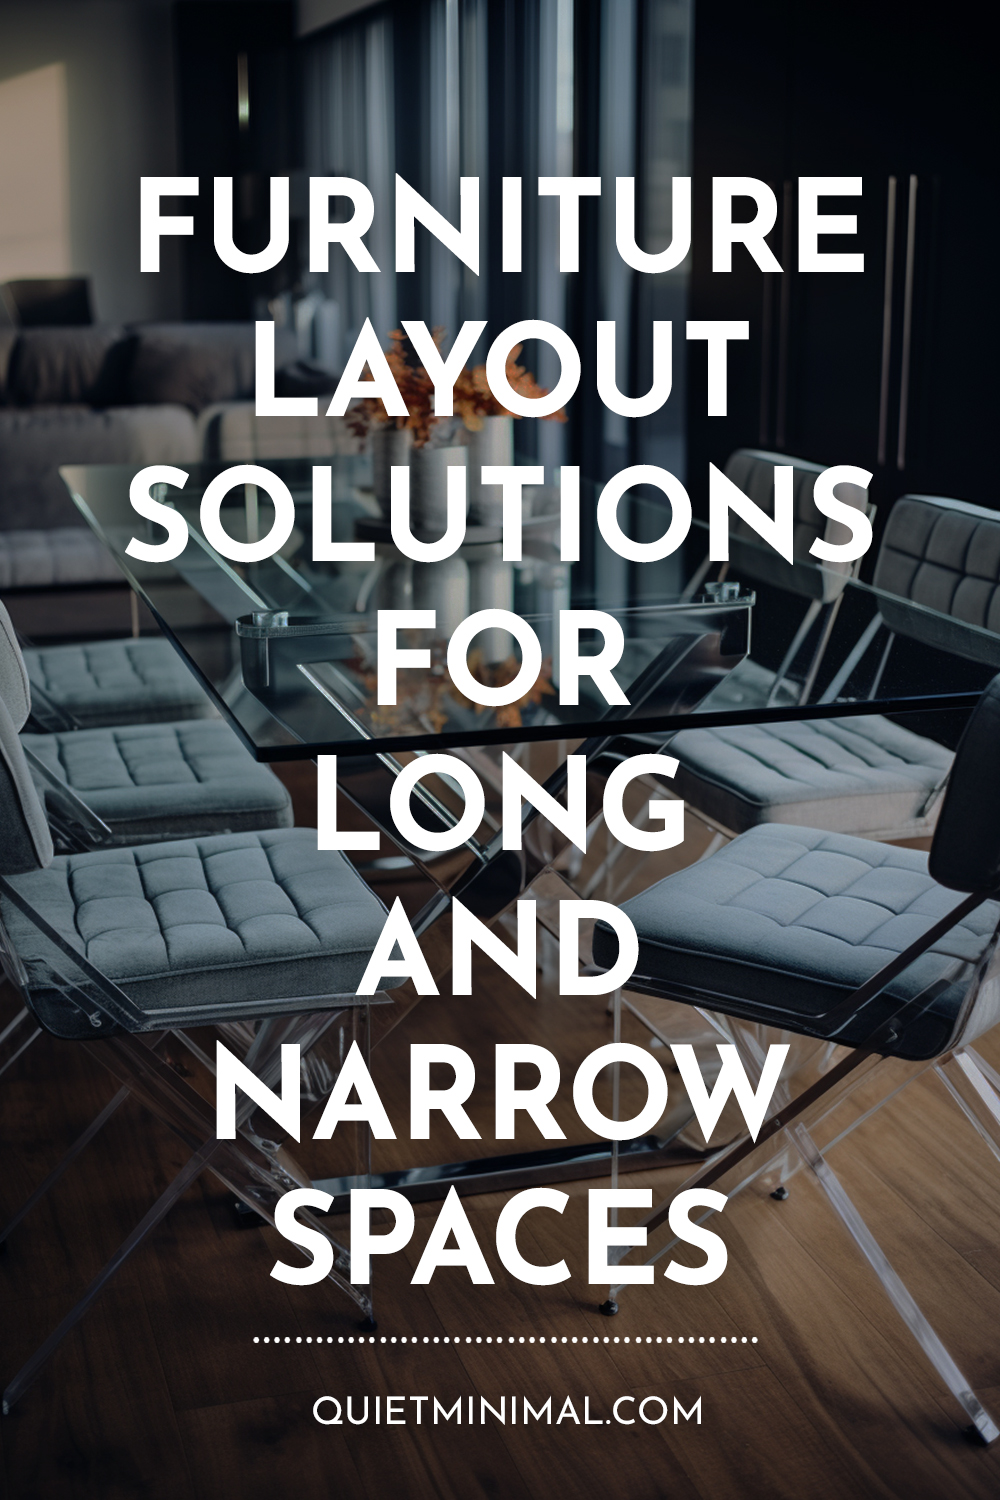 Furniture layout solutions for long and narrow spaces.